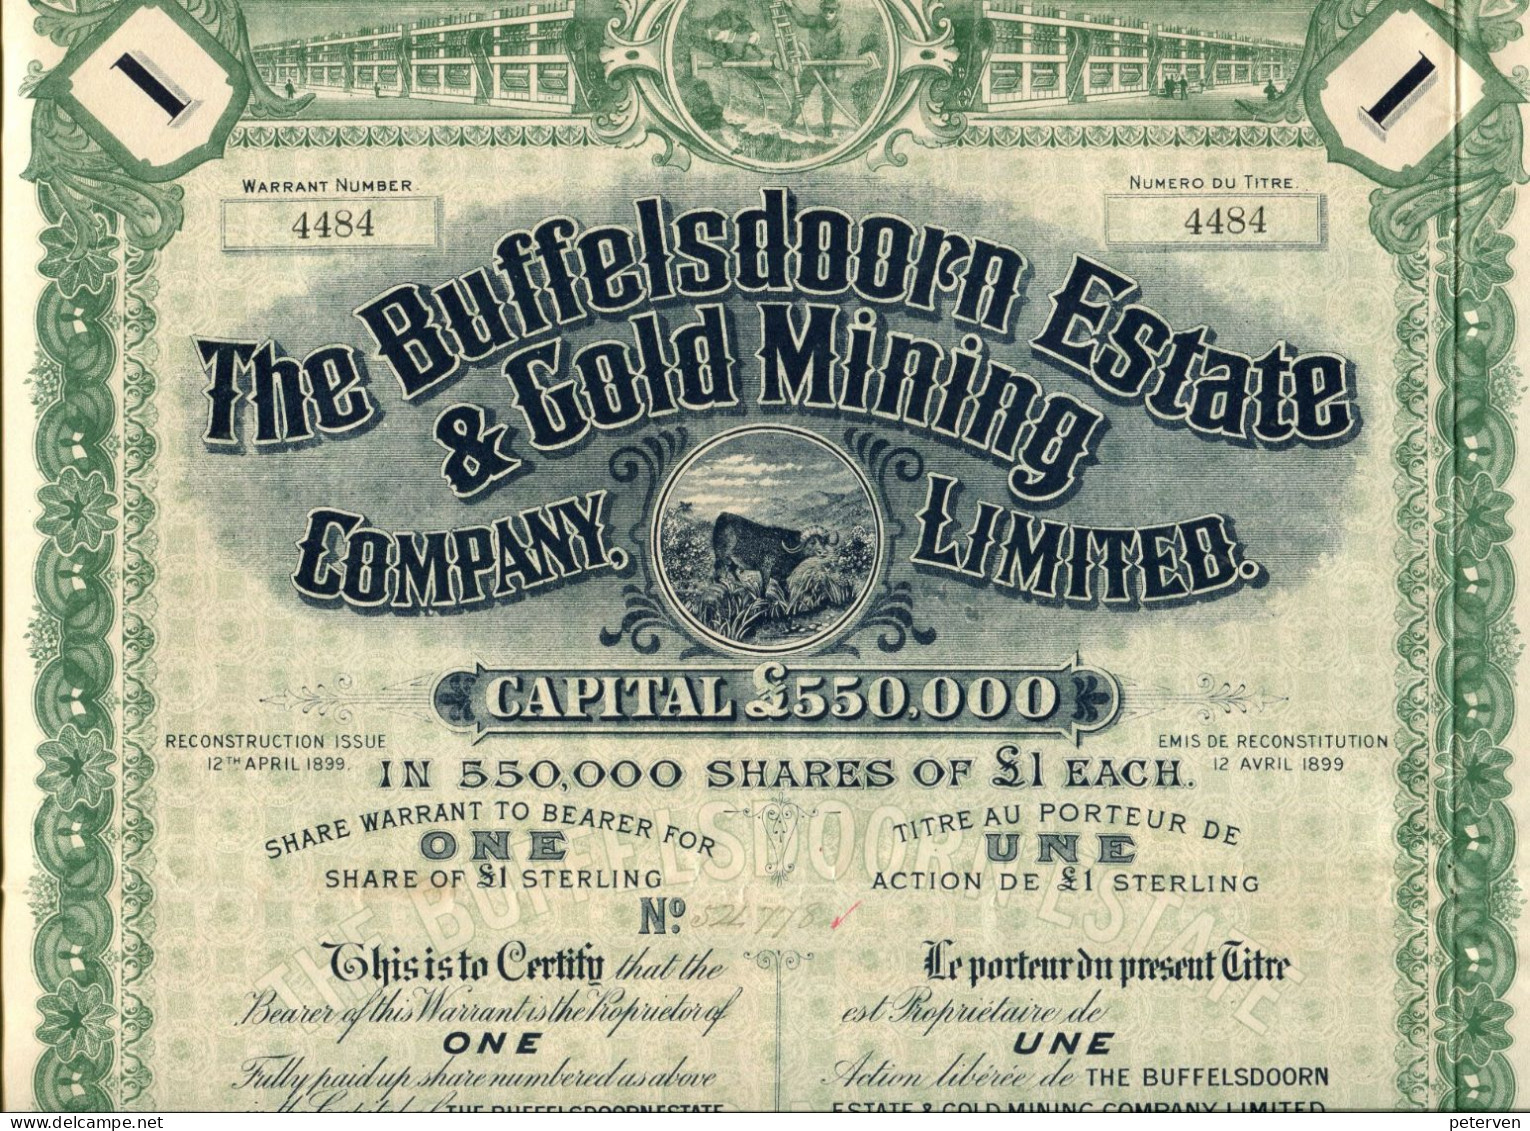 The BUFFELSDOORN ESTATE & GOLD MINING COMPANY, Limited - Mineral